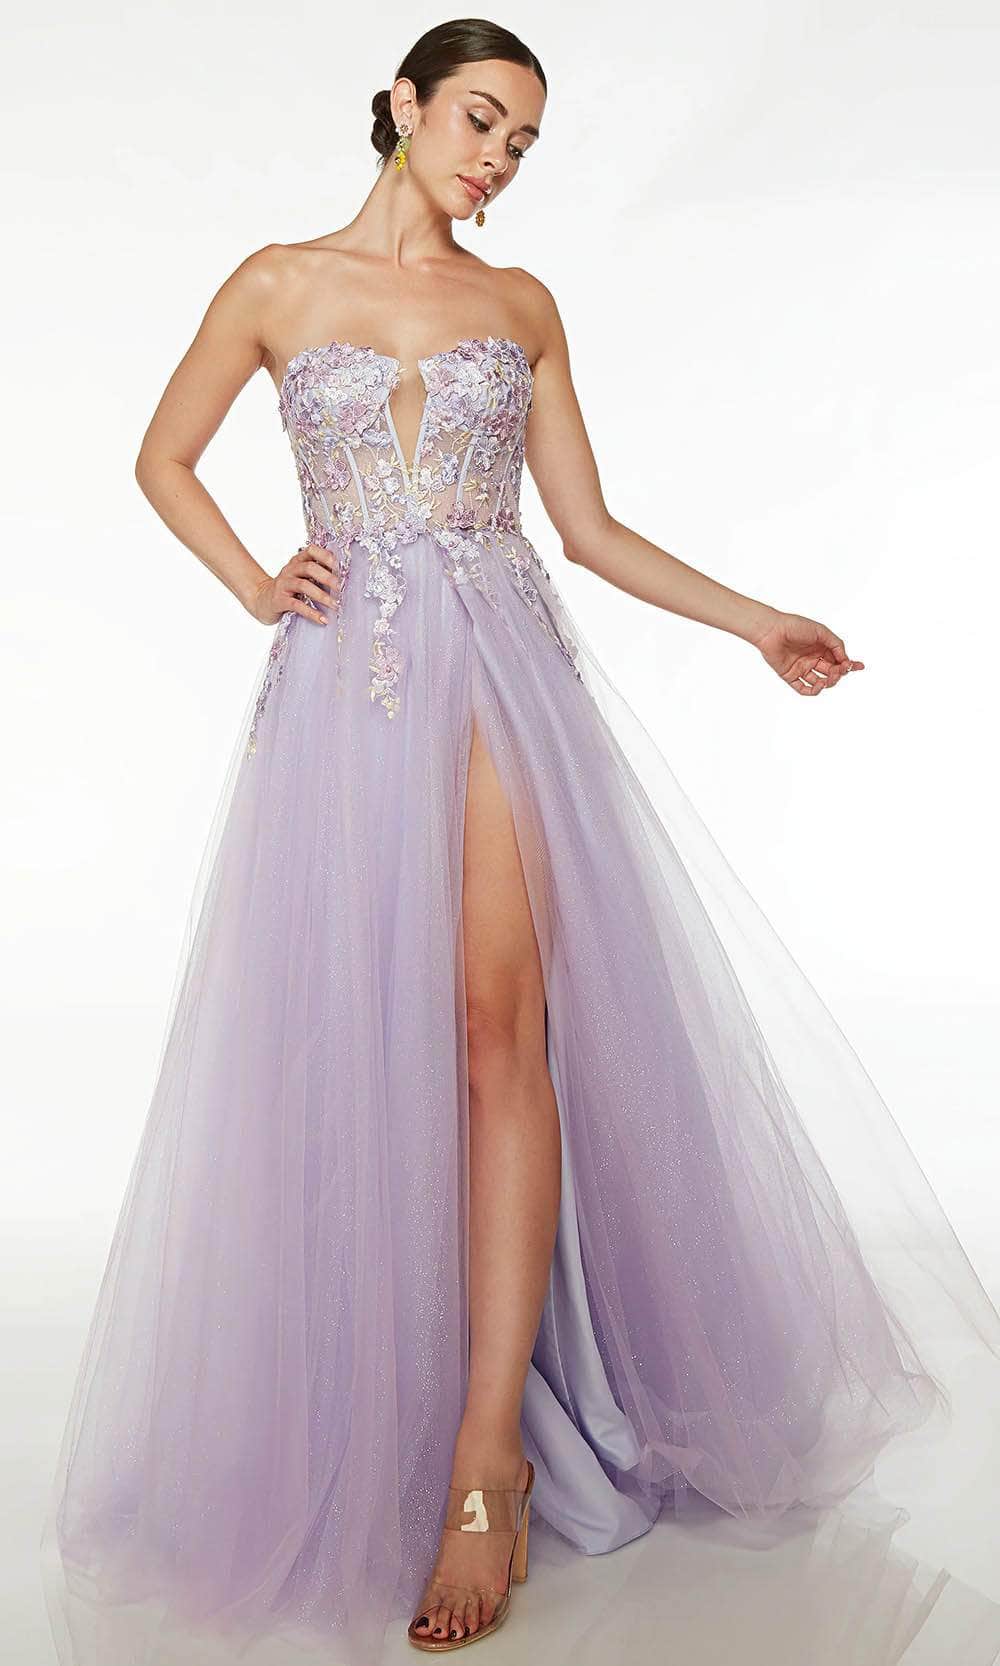 Alyce Paris 61654 - Strapless Embroidered Prom Dress
